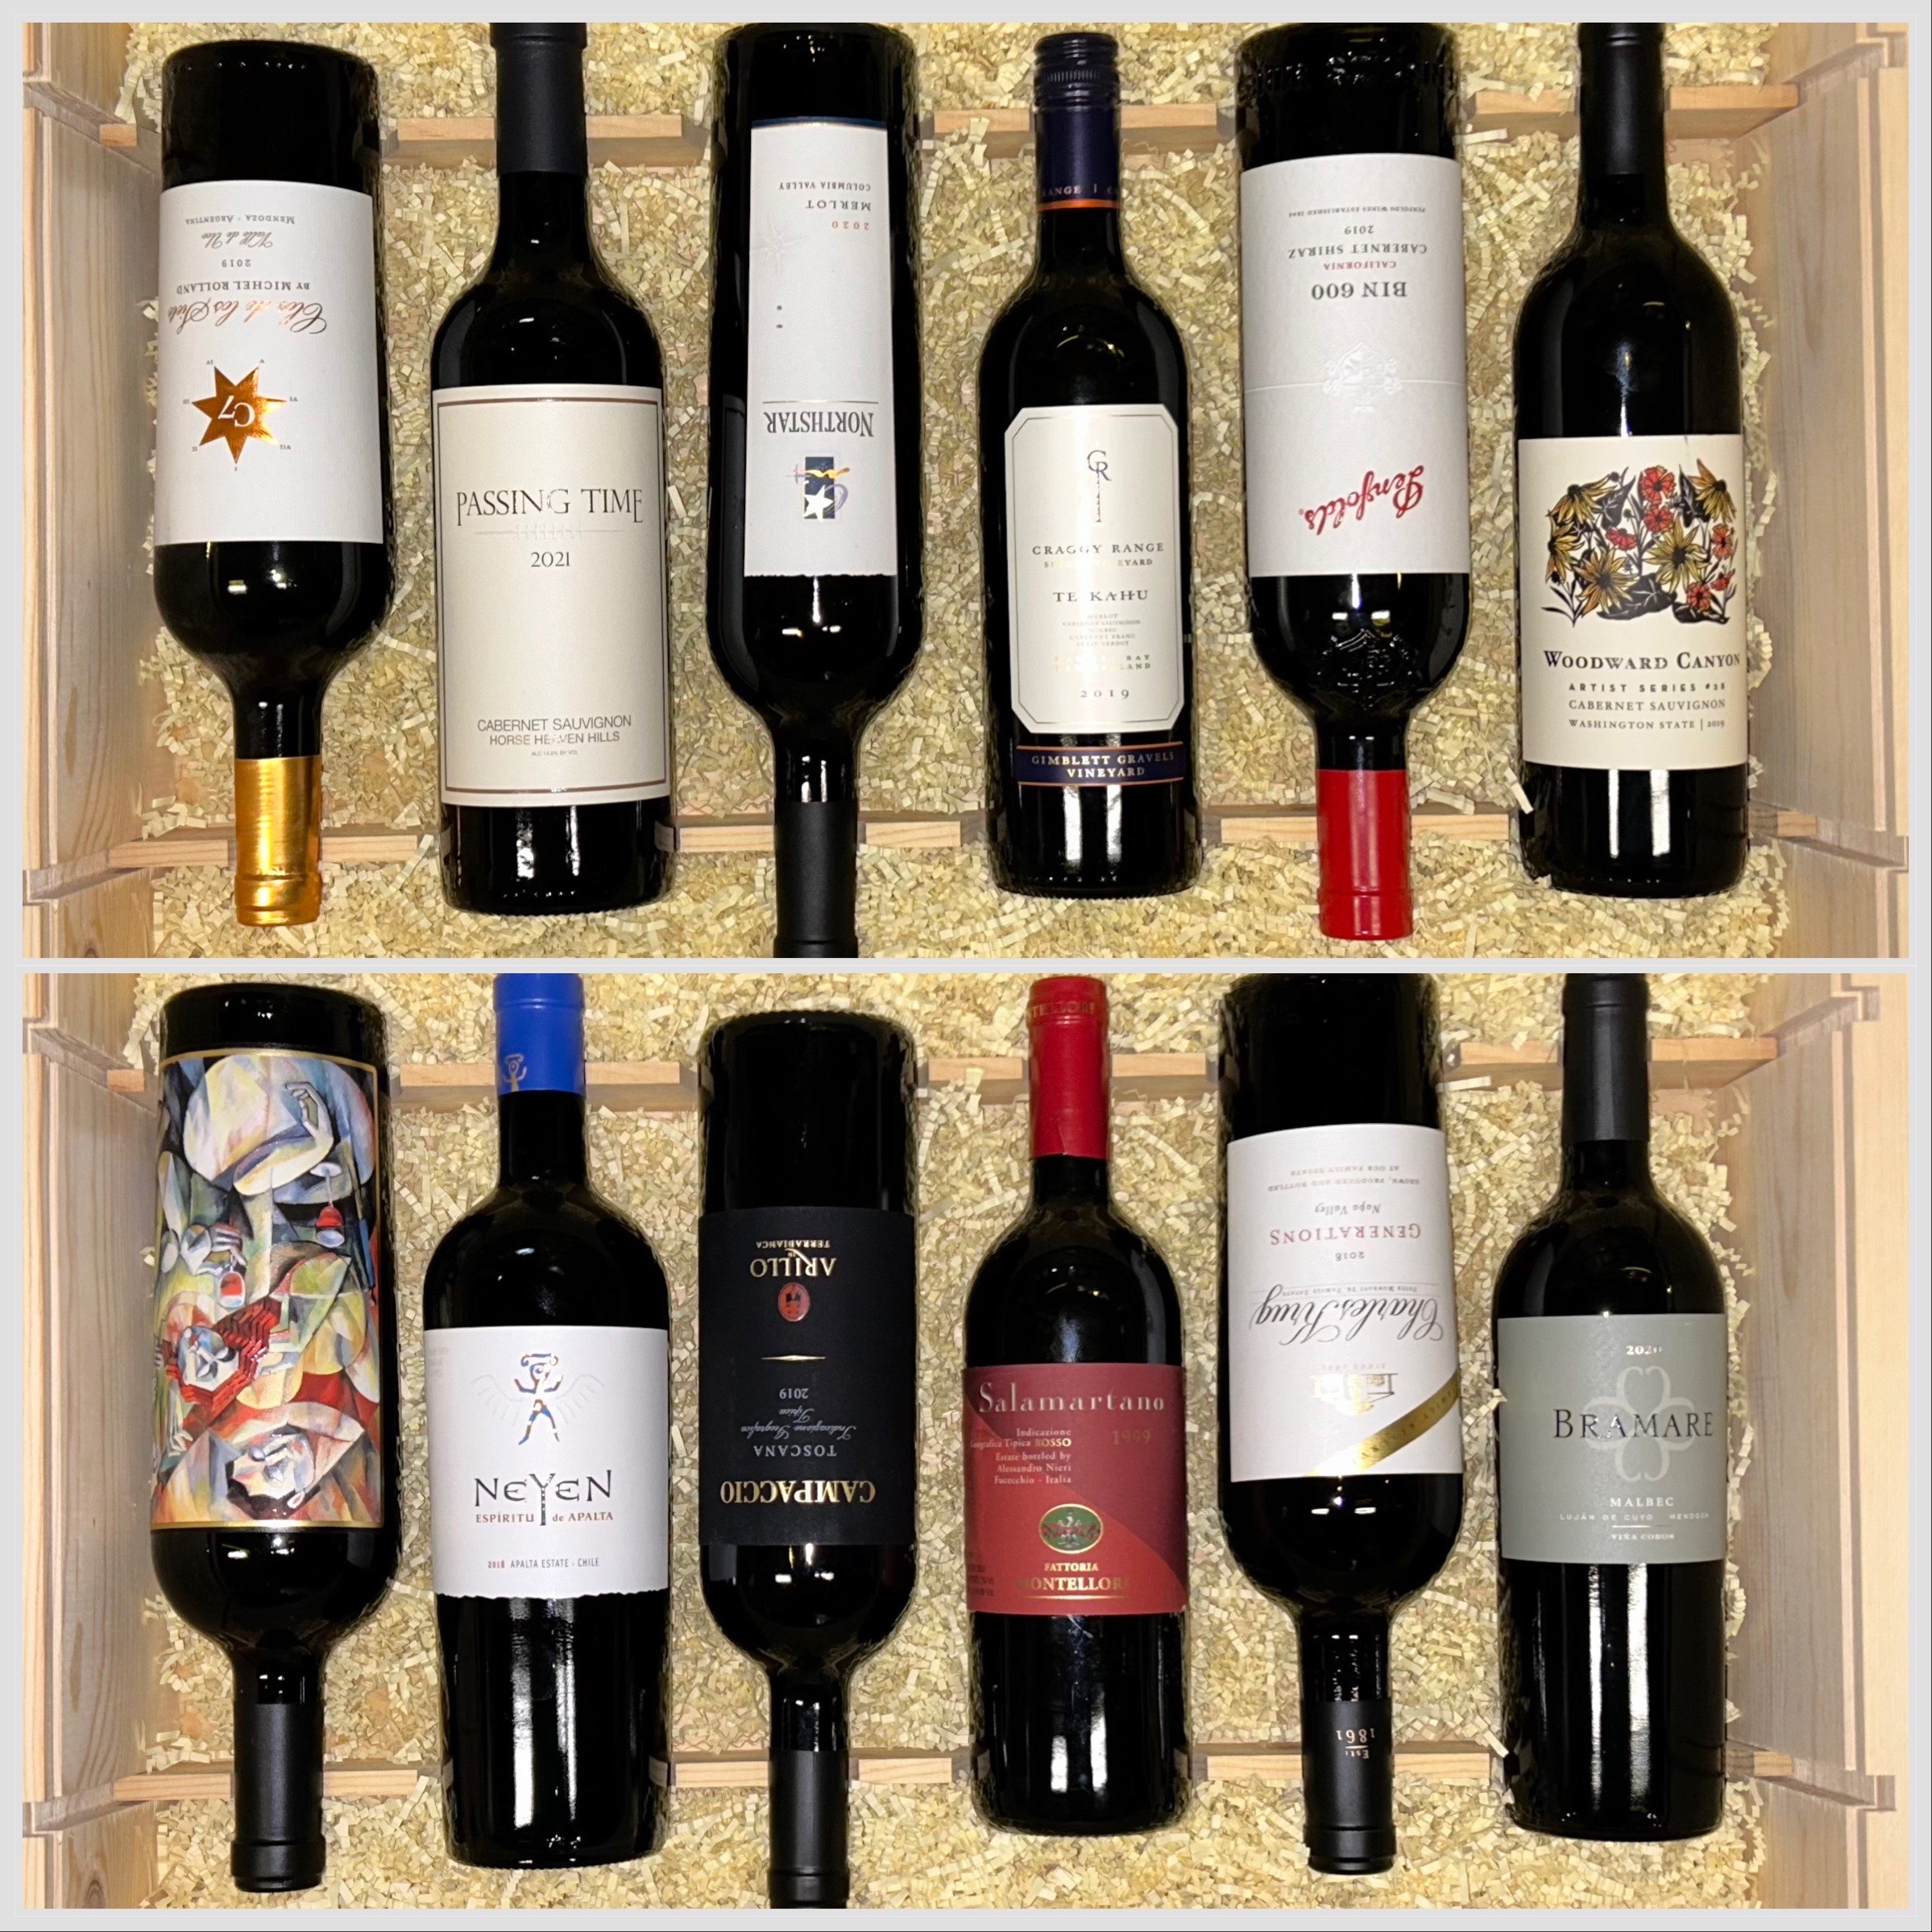 Bordeaux Blends from around the world 12 Bottle Case #23A4 image